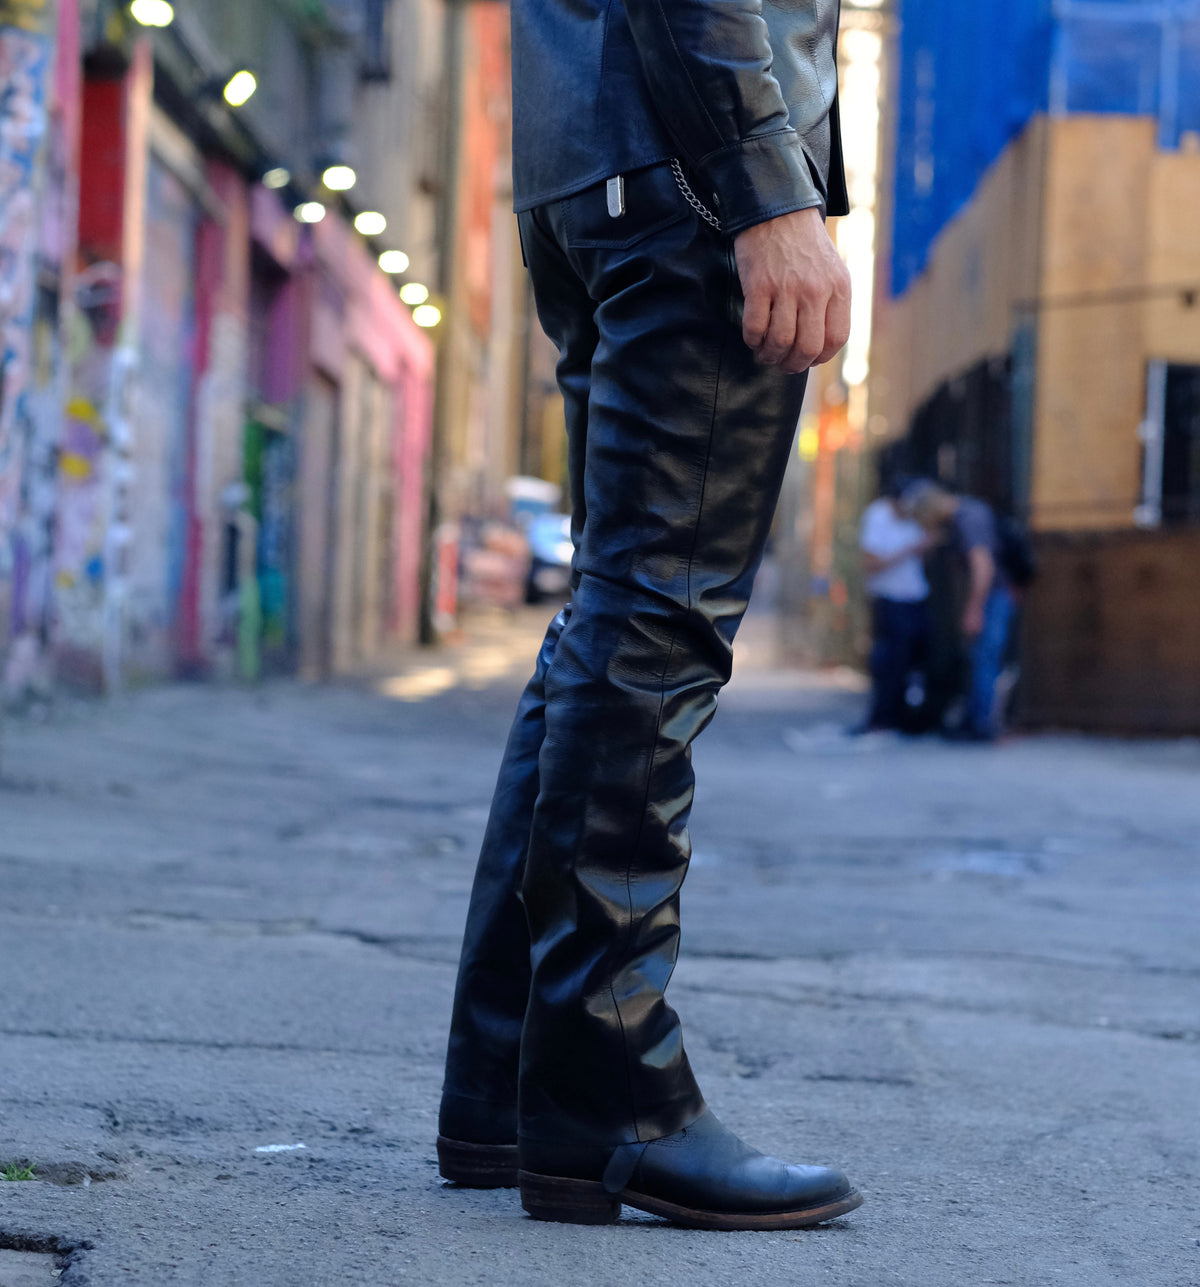 Y&#39;2 Leather X The Shop 1mm Teacore Horsehide Leather Pants